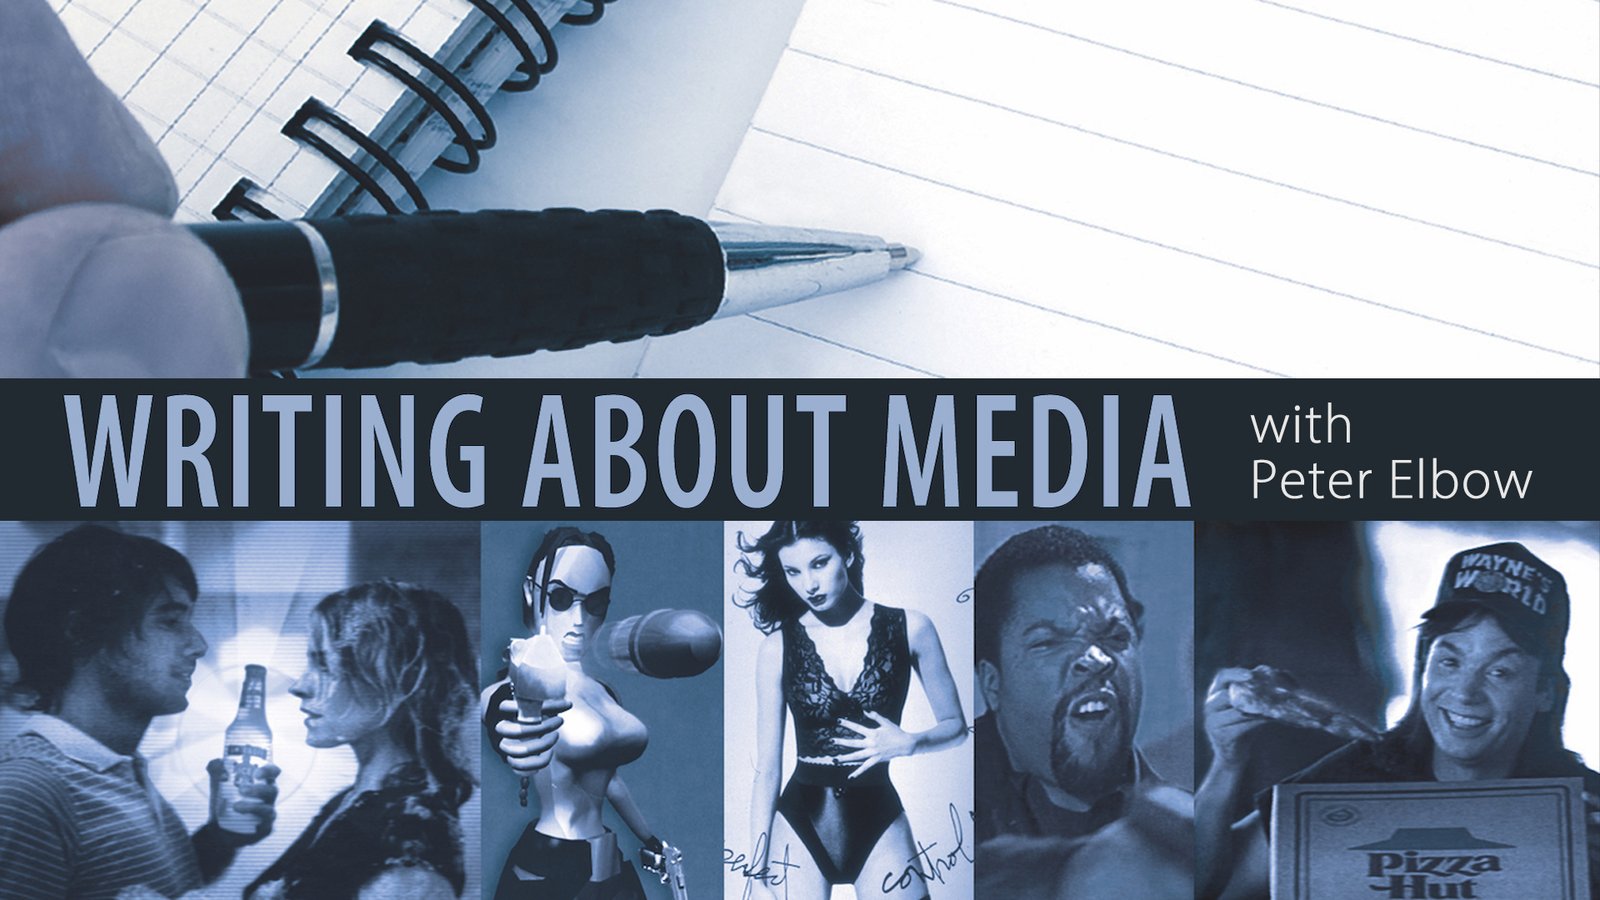 Writing About Media with Peter Elbow